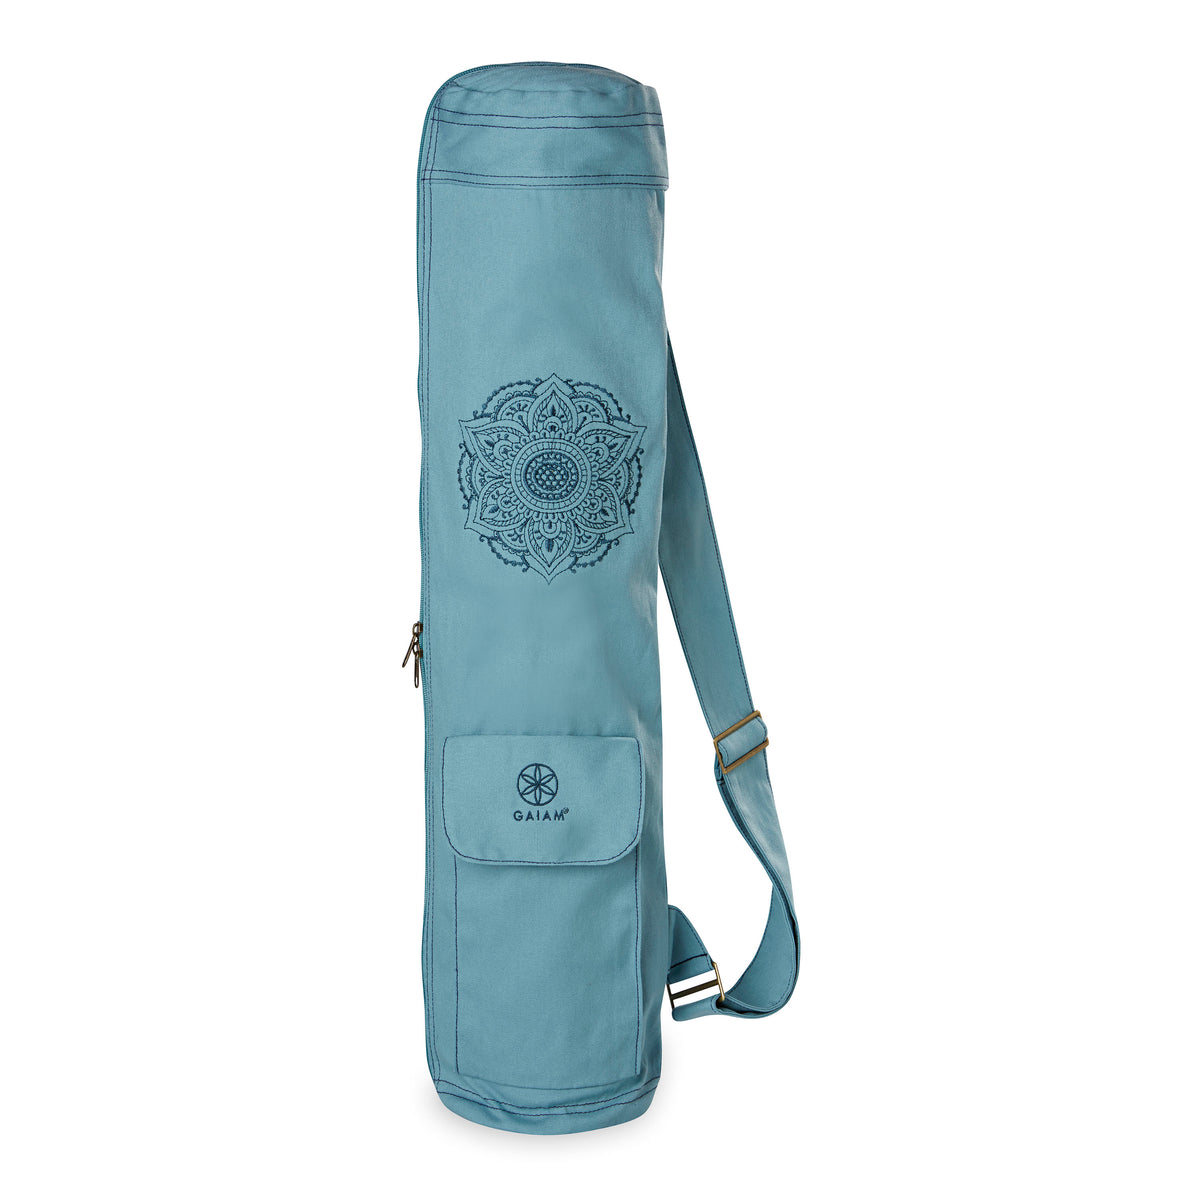 Accessories Archives - Extra Large Yoga Bags for mats, blocks and